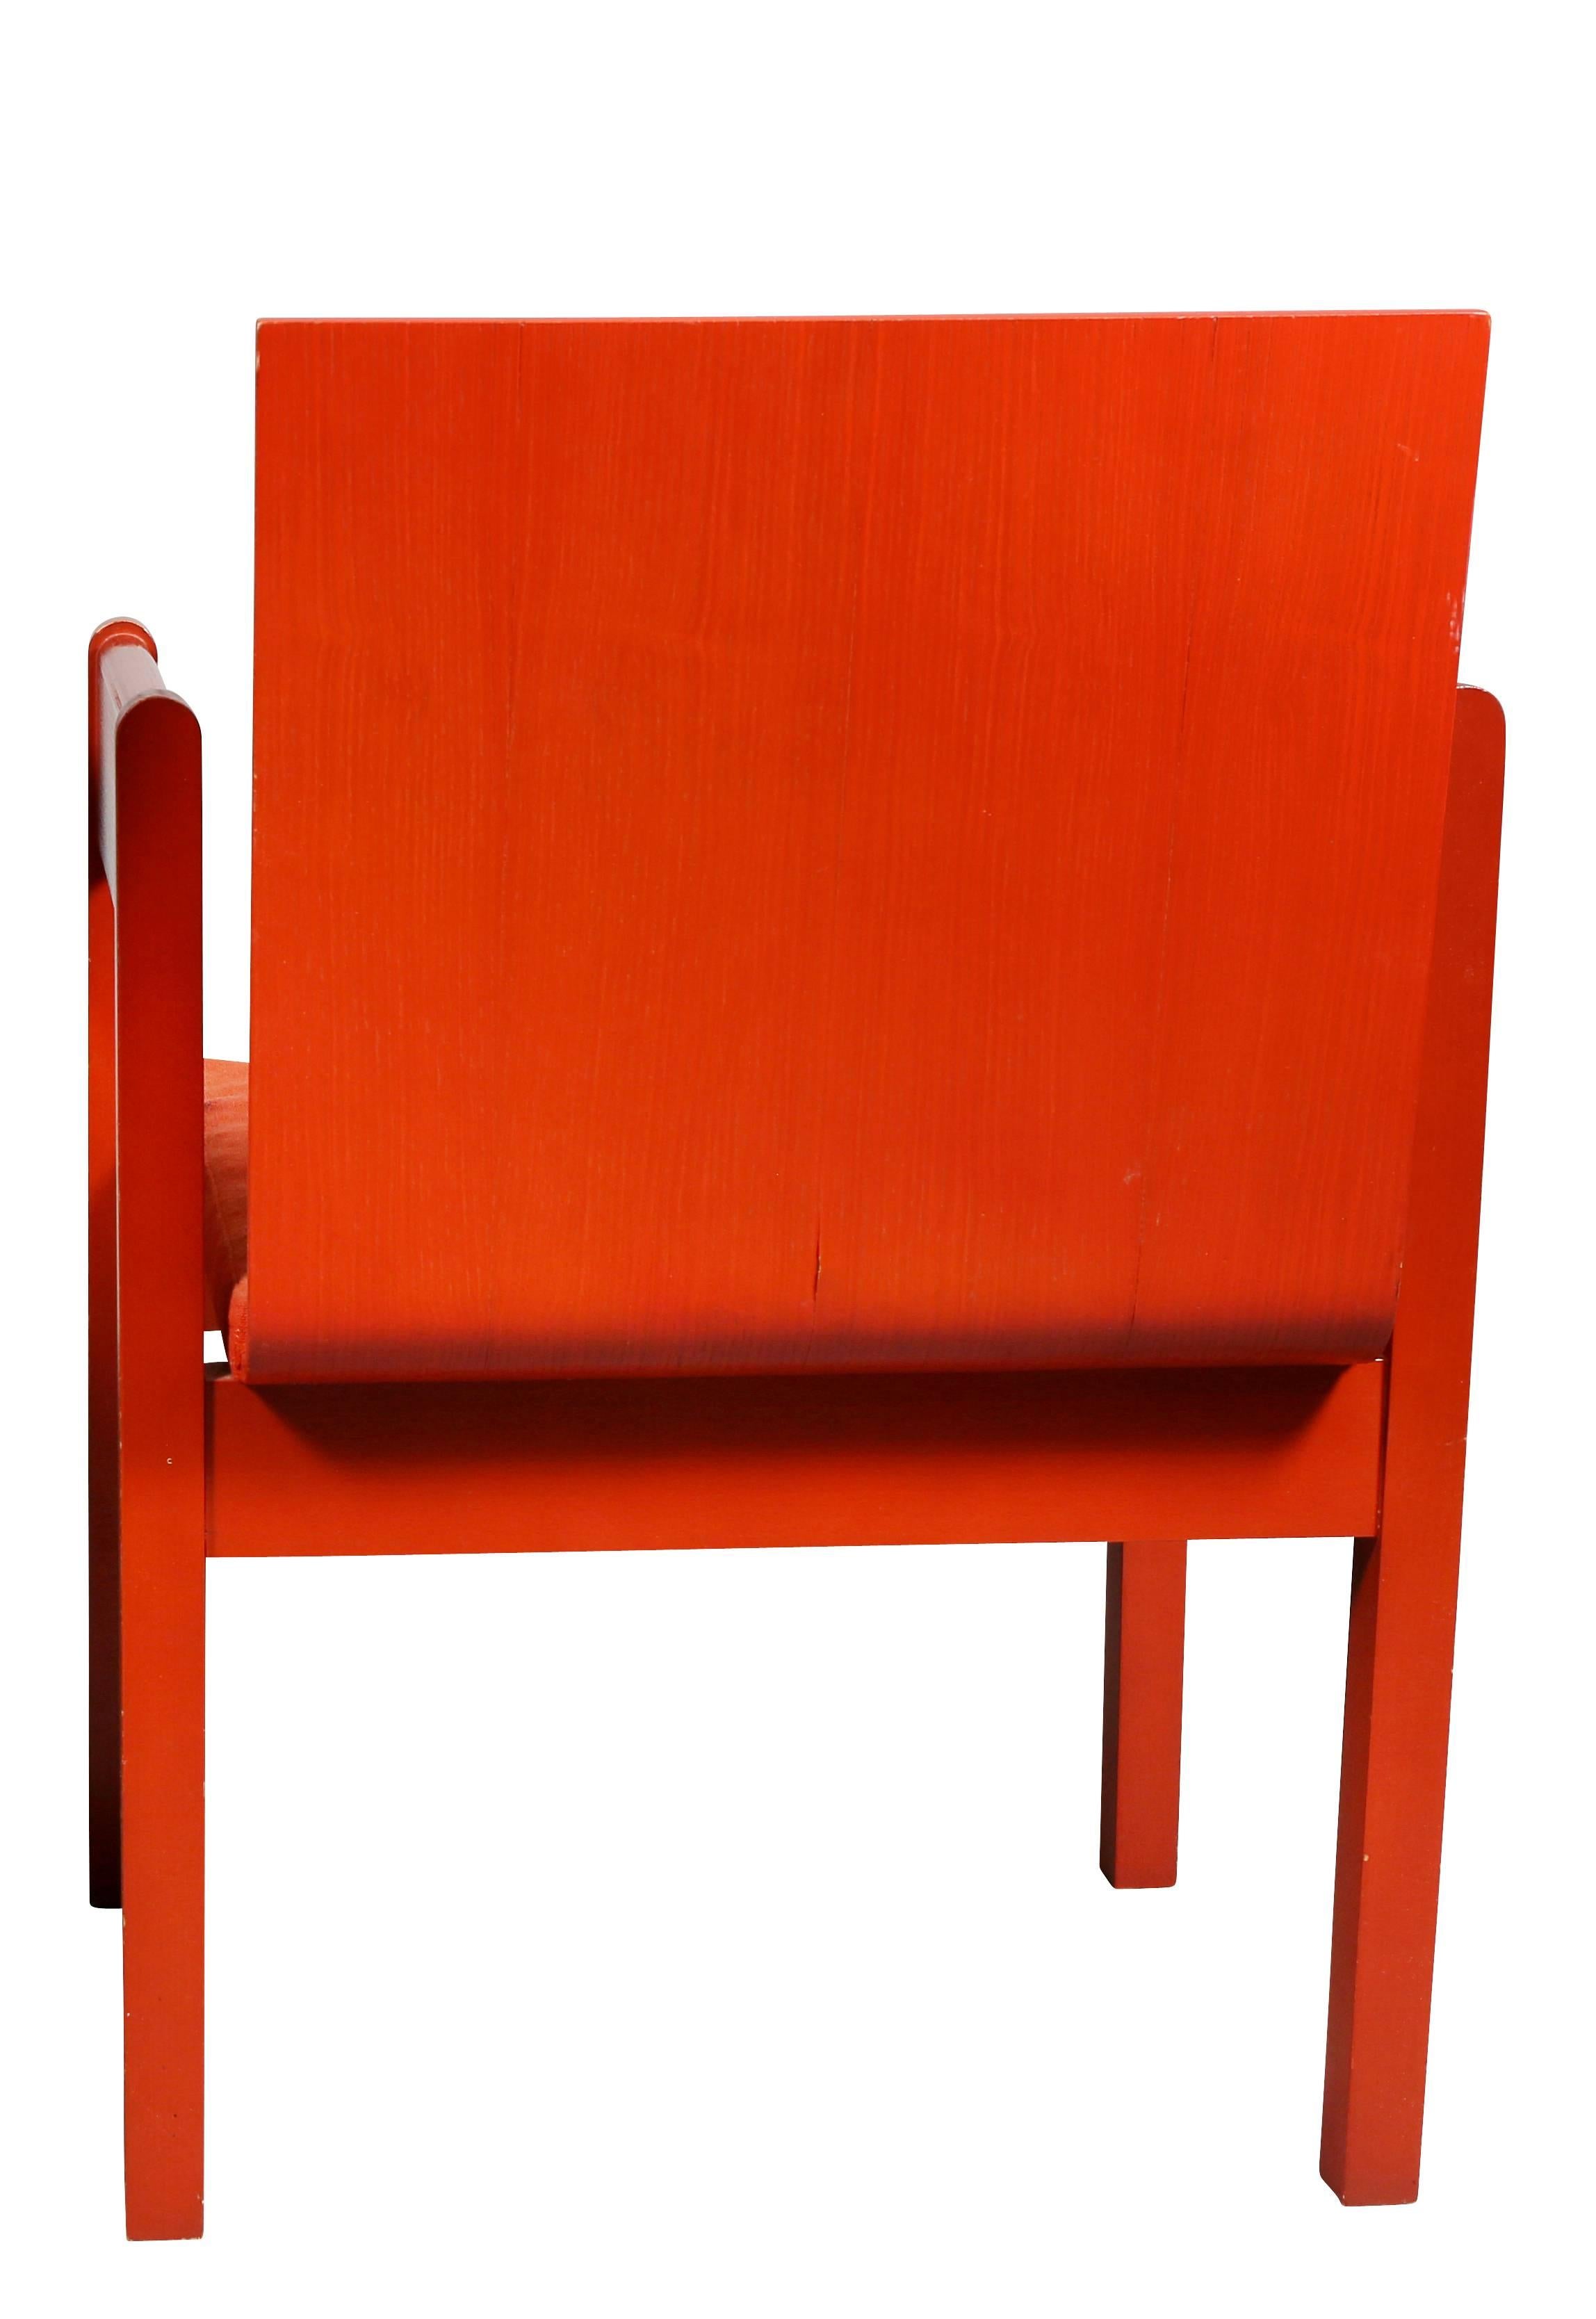 Prince of Wales Red Painted Investiture Chair 1